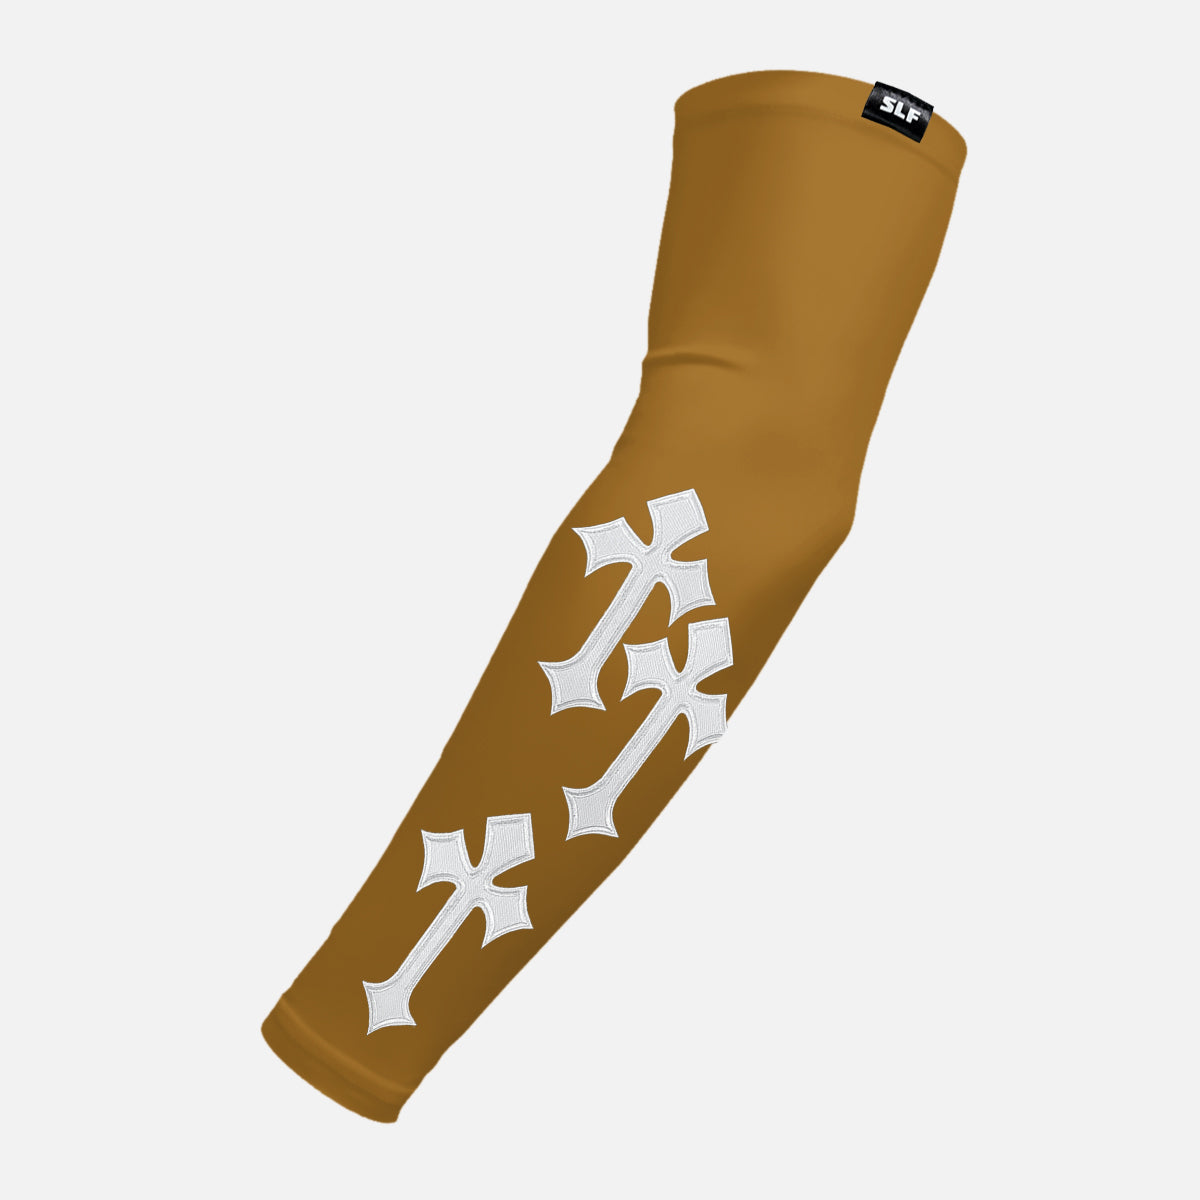 Gothic Cross Patches Arm Sleeve